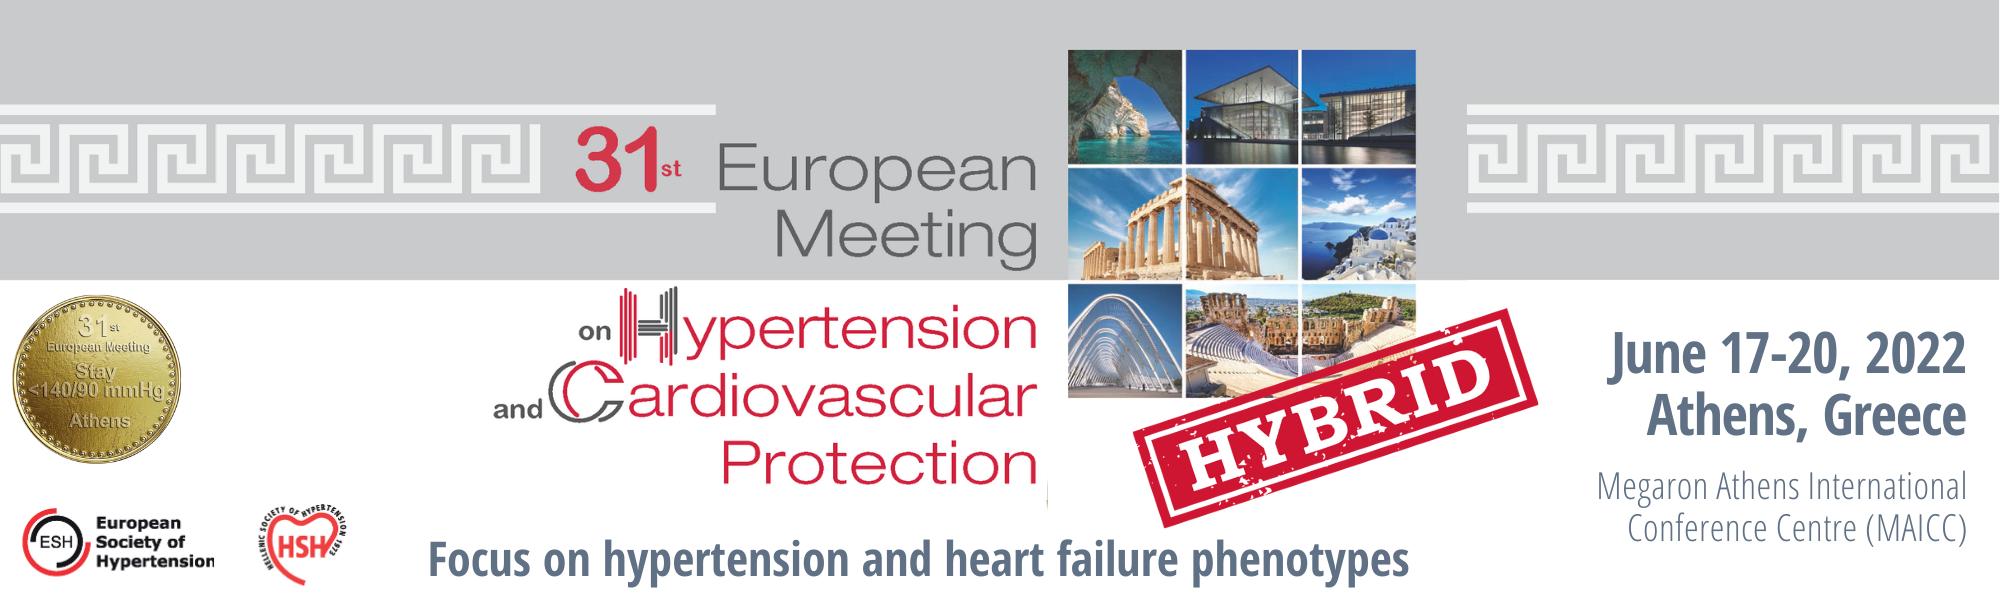 31^ European Meeting on Hypertension and Cardiovascular Protection - Will you be there?